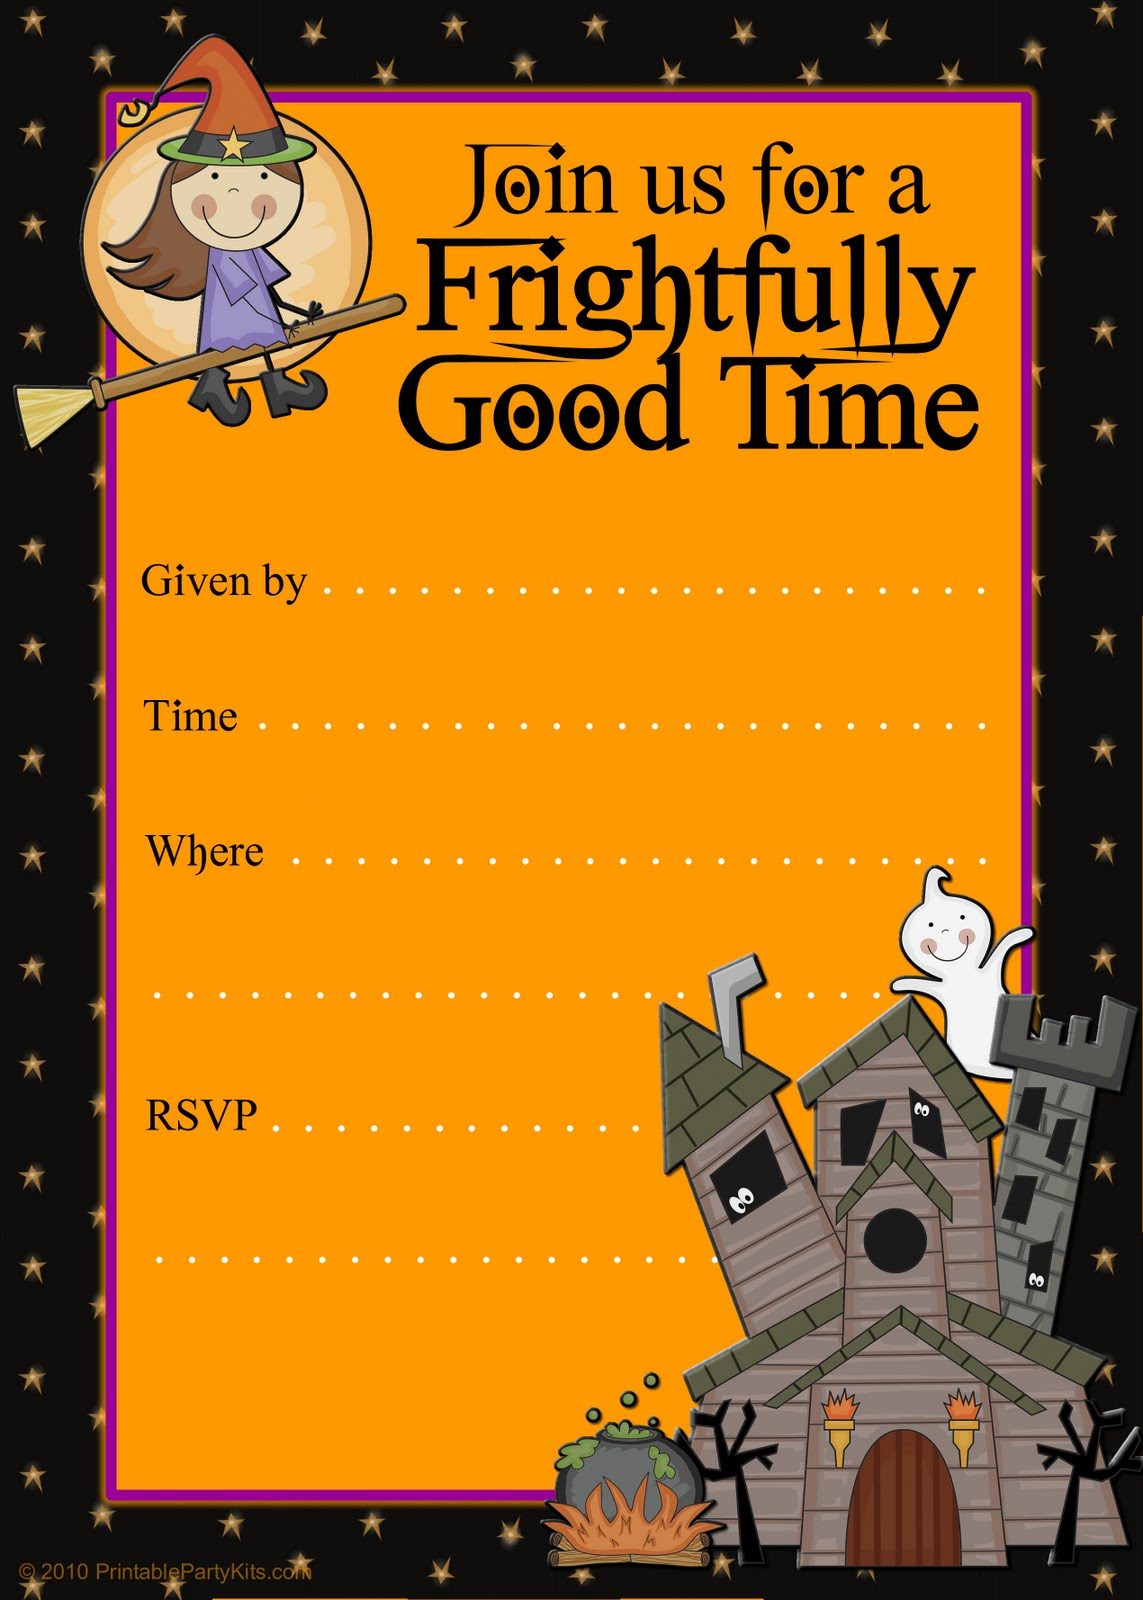 Printable Party Flyers #6D2B047B0C50 - Idealmedia - Free Printable Flyers For Parties